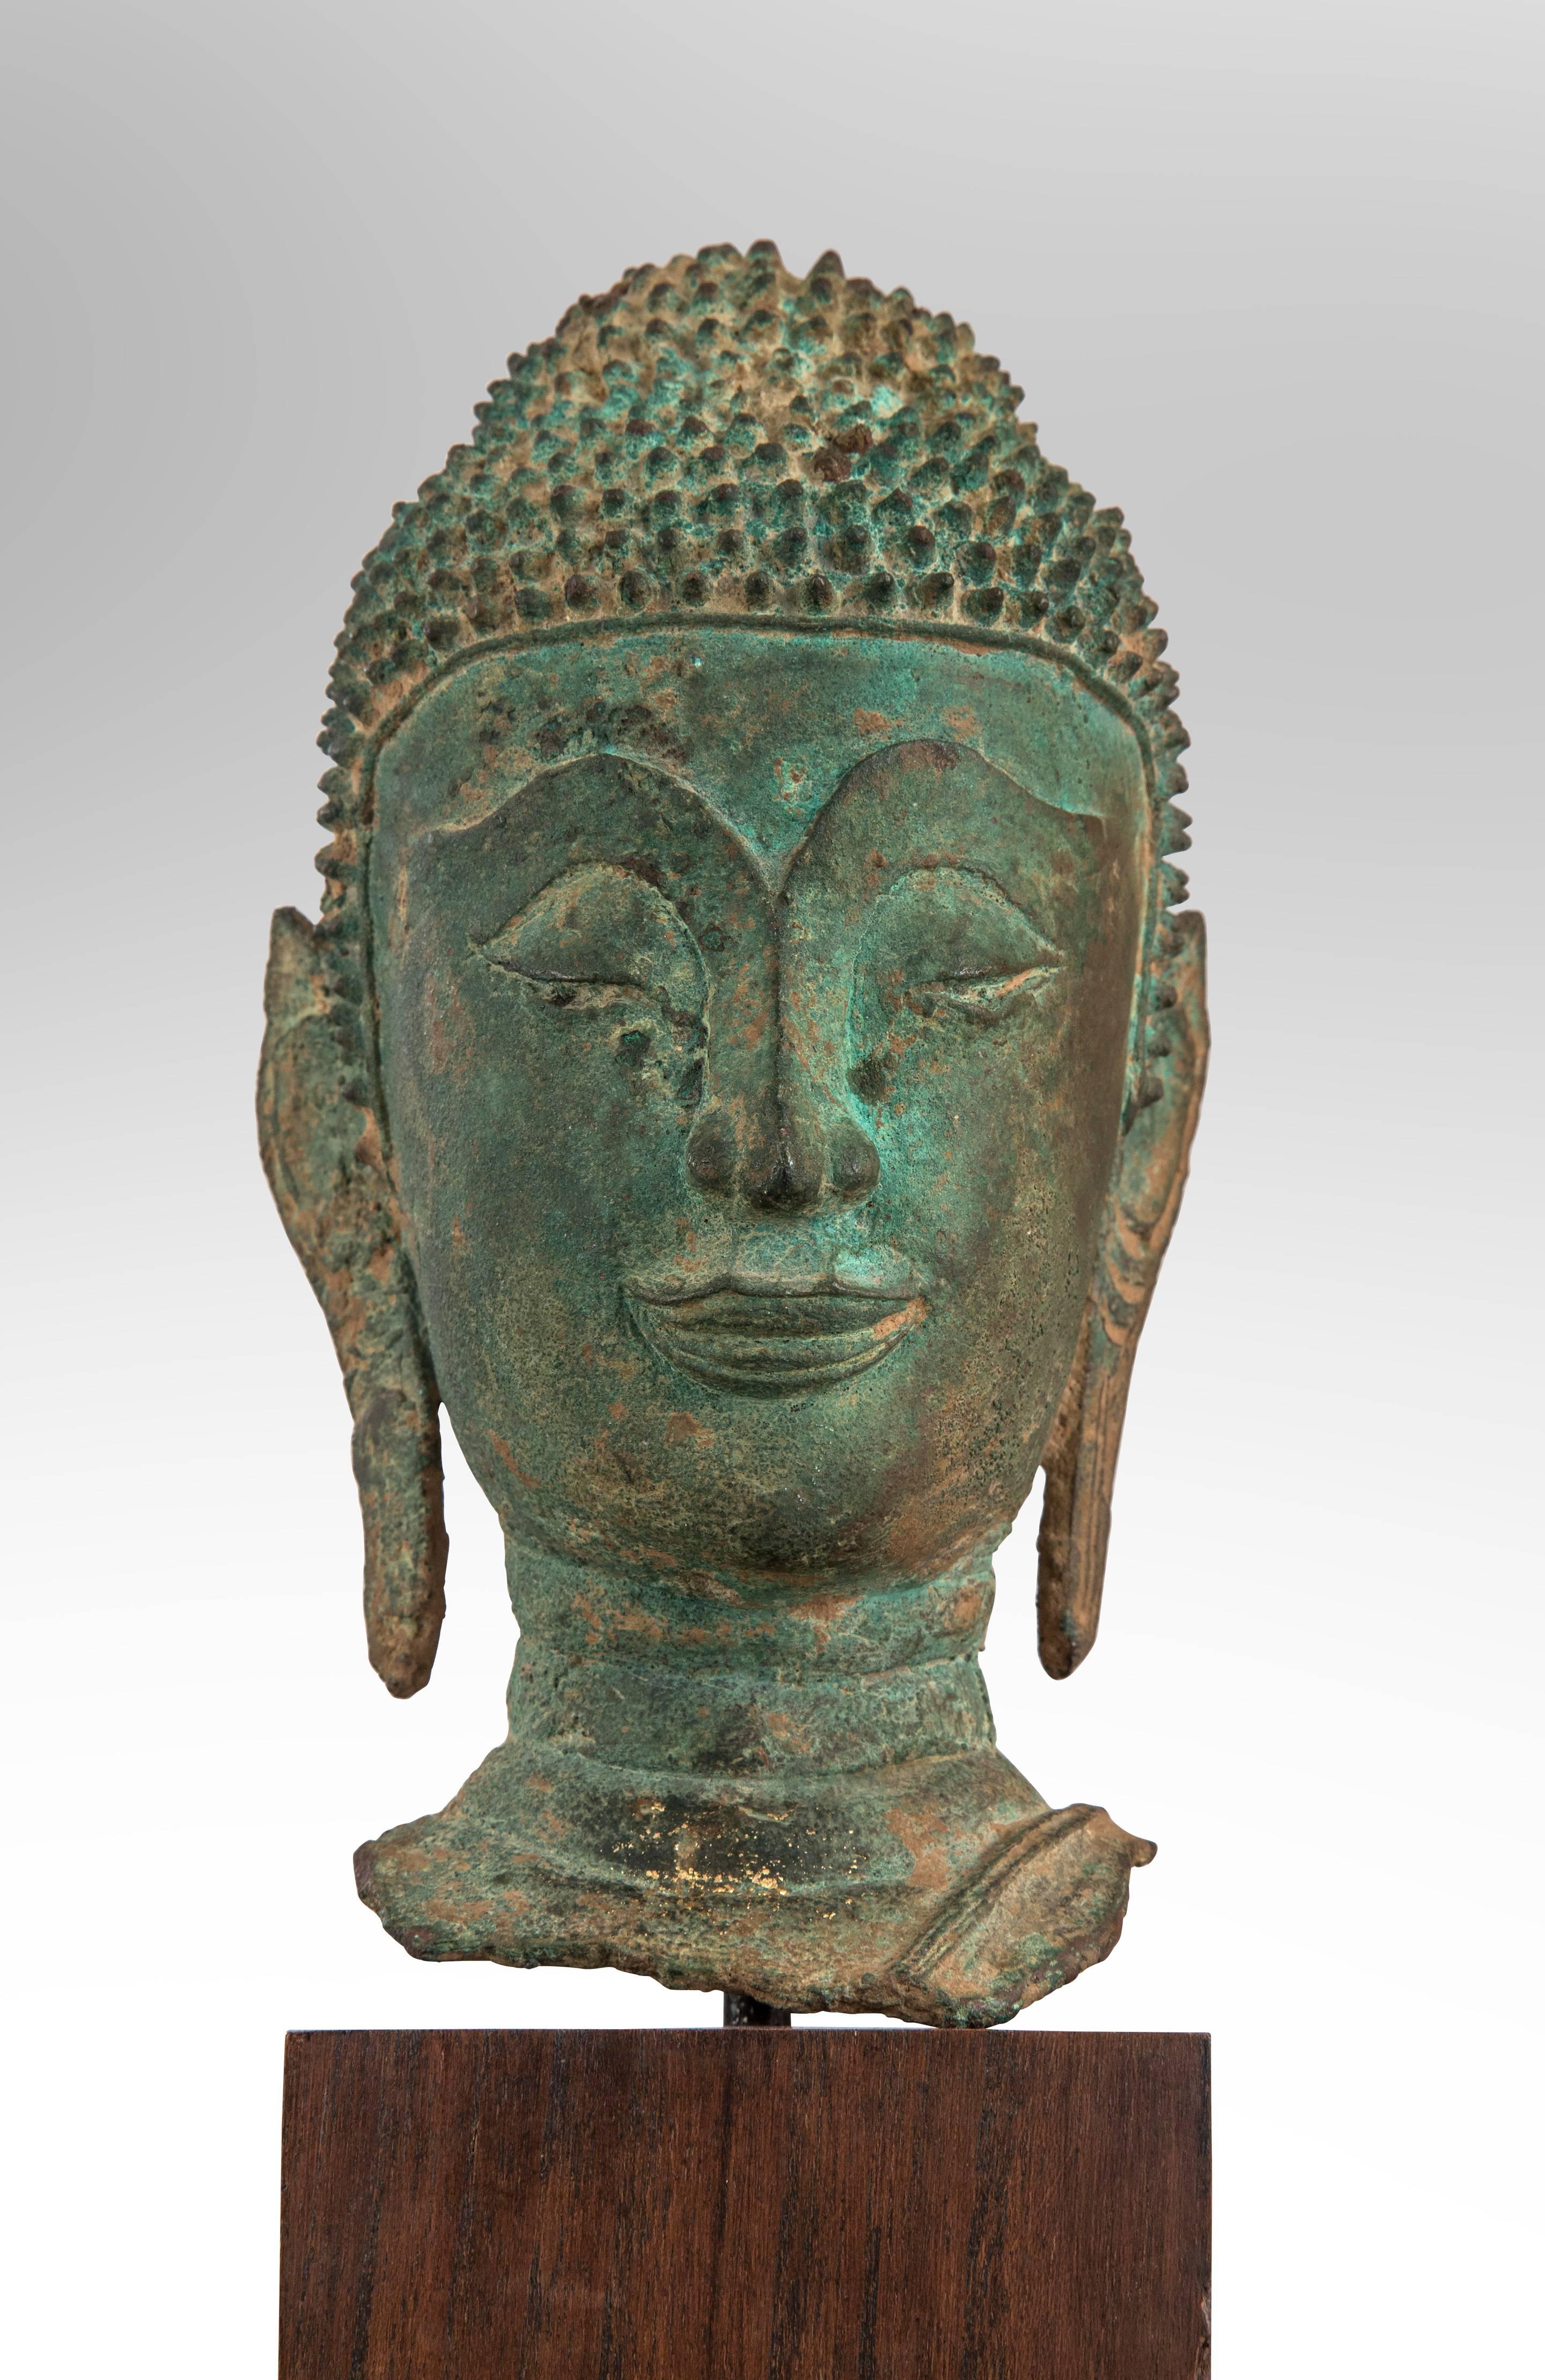 A Thai Verdigris bronze Buddha head
Late Ayutthaya style in verdigris patinated bronze, the bust on a later stand. Ketumala missing.
17th century or later.